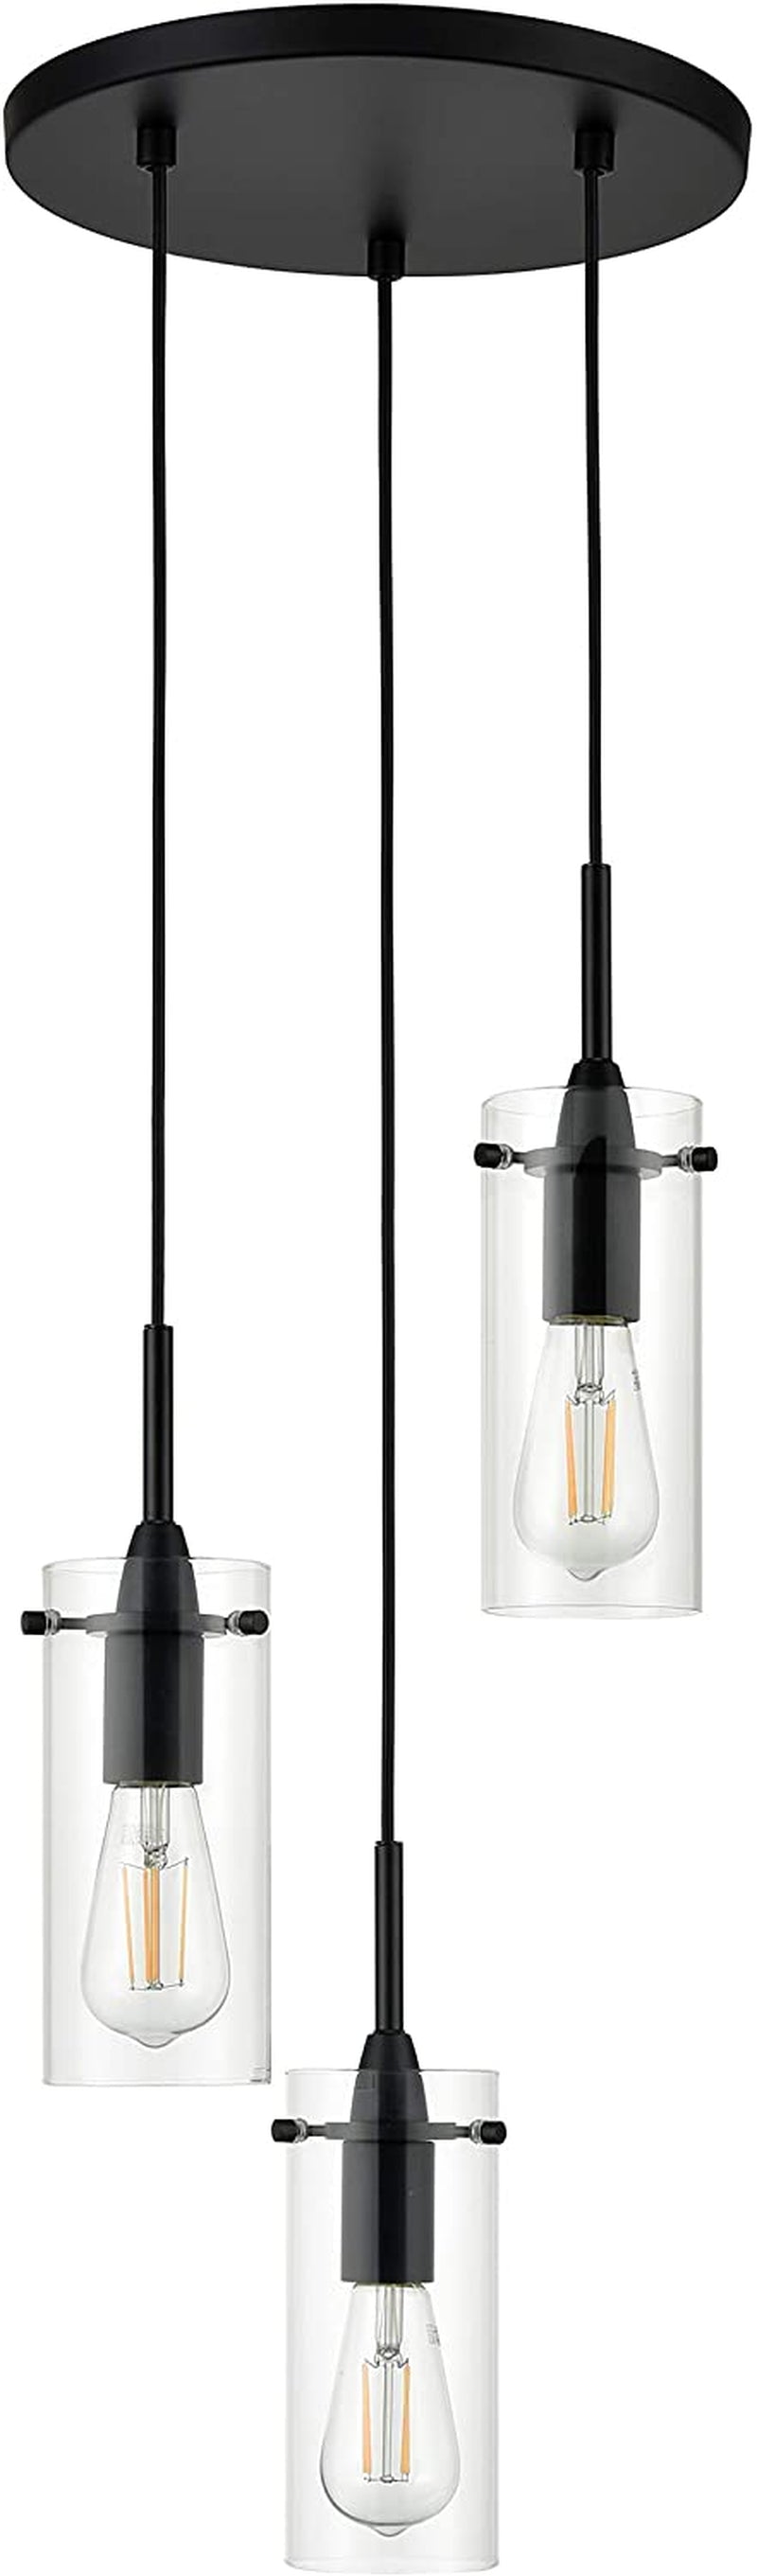 Linea Di Liara Effimero 3-Light Cluster Pendant Lights Stairwell Lighting Small Chandelier Brushed Nickel Modern Chandelier Light Fixture Foyer Chandeliers Entryway High Ceiling Staircase Lights Home & Garden > Lighting > Lighting Fixtures Linea di Liara Black 3 Light 